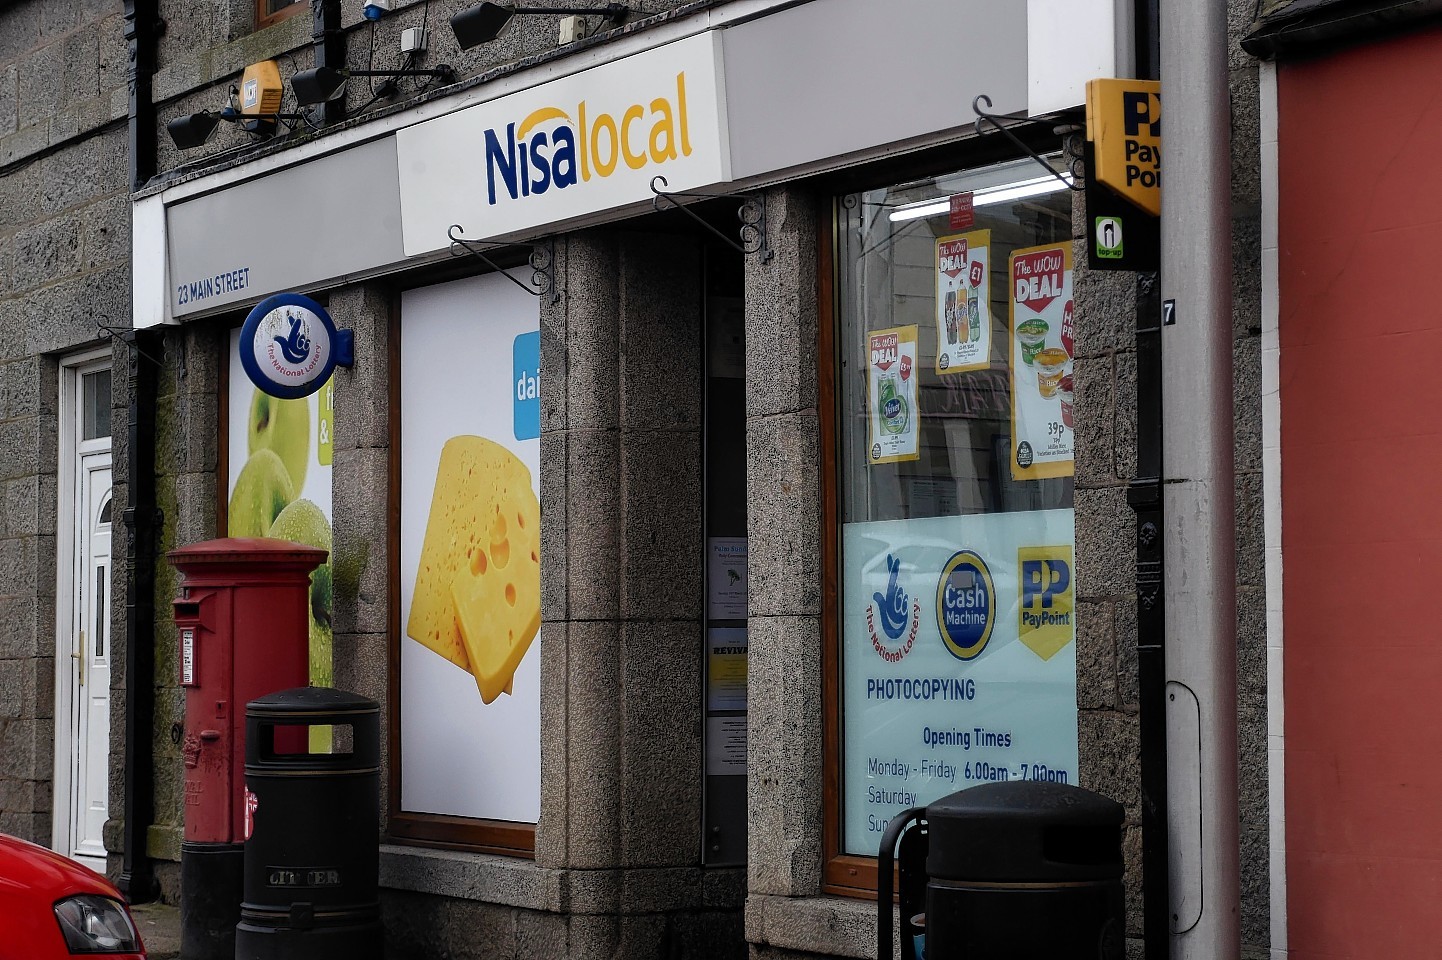 The Nisa shop was robbed in the early hours of Thursday morning